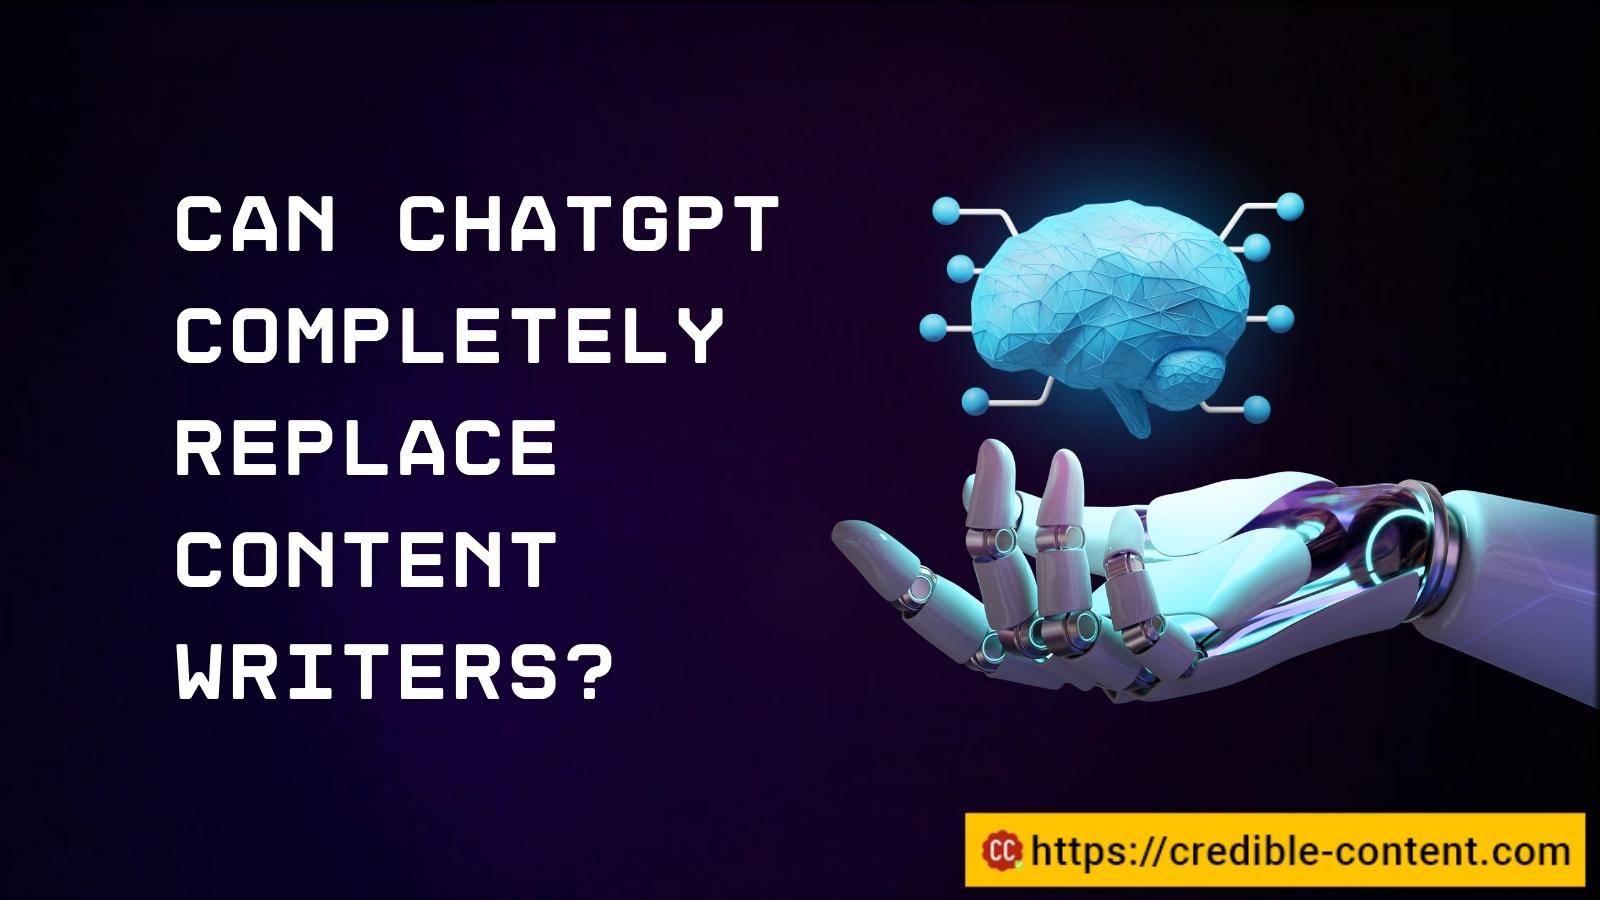 Can ChatGPT completely replace content writers